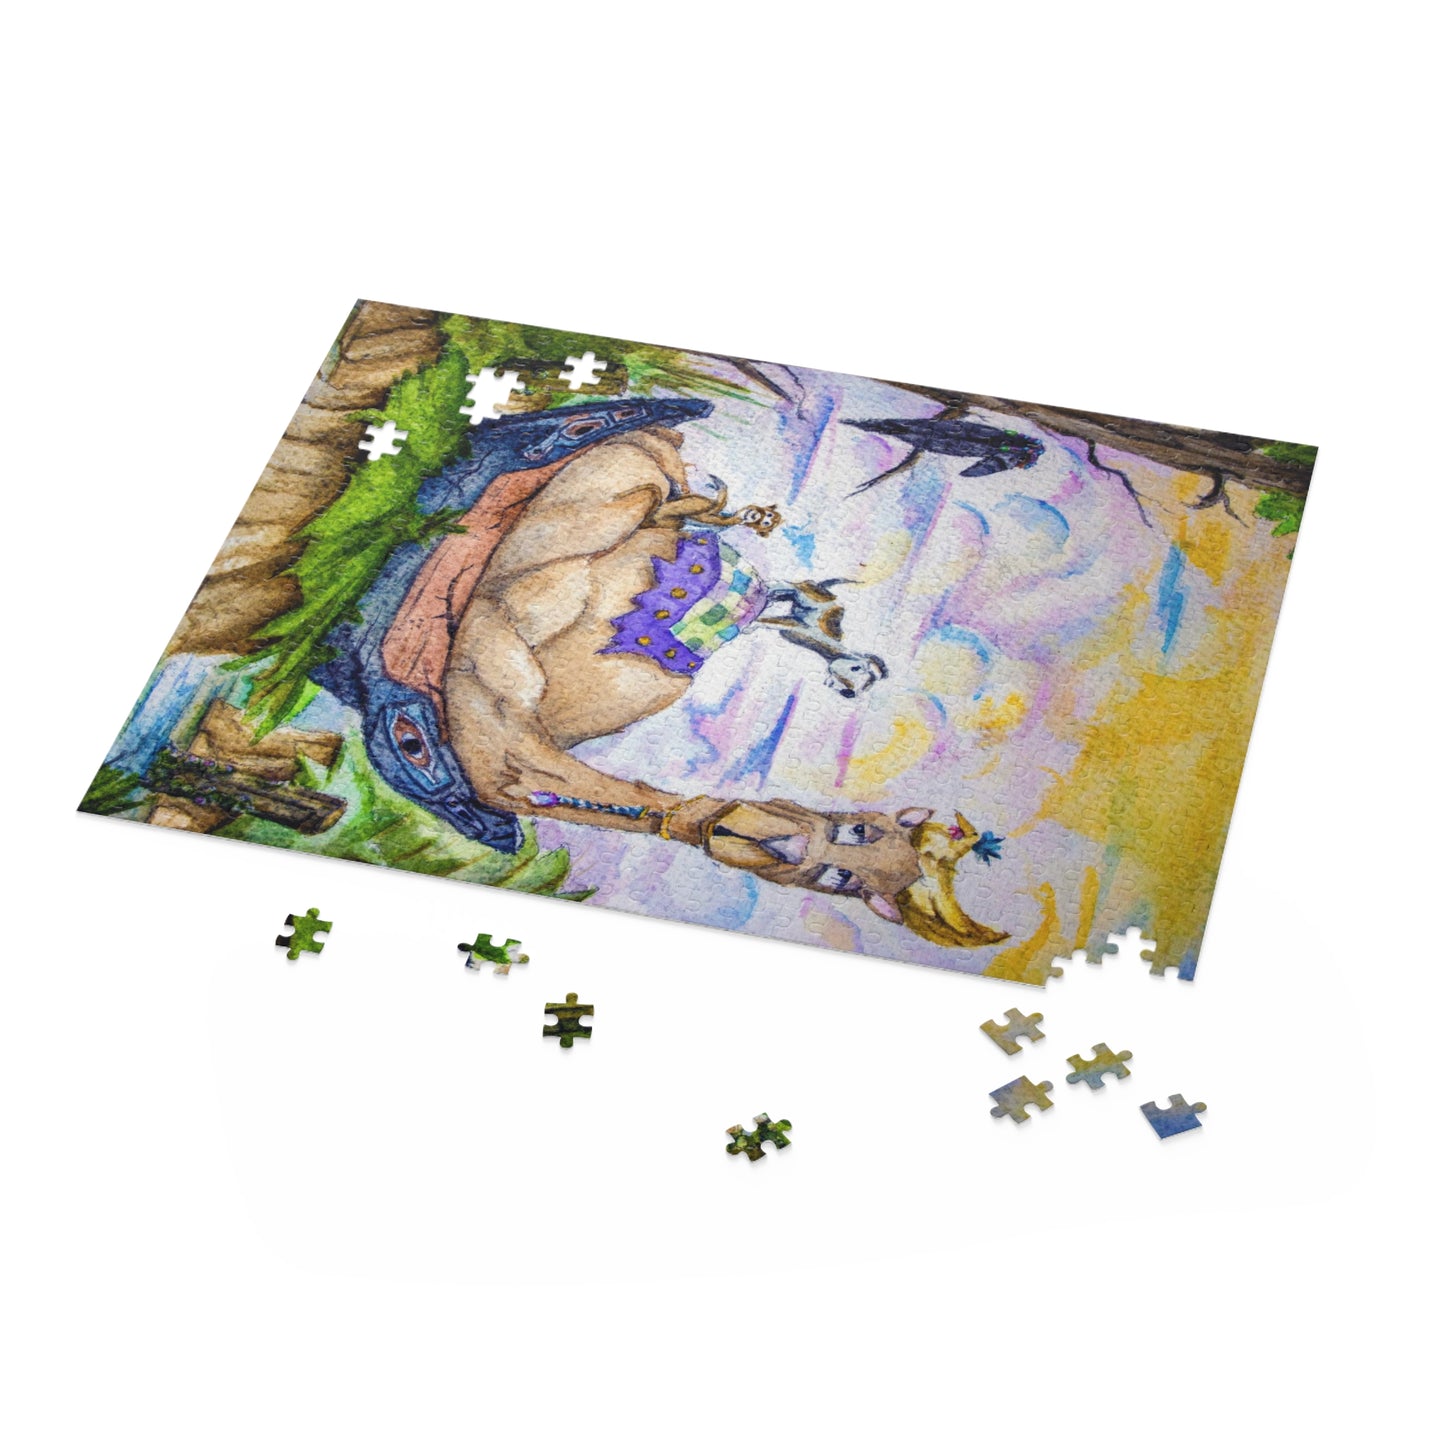 The View Chicken's Best Spot Whimsical Jigsaw Puzzle by J. Wesley Bailey IV, Watercolor 120, 252 or 500 Pieces